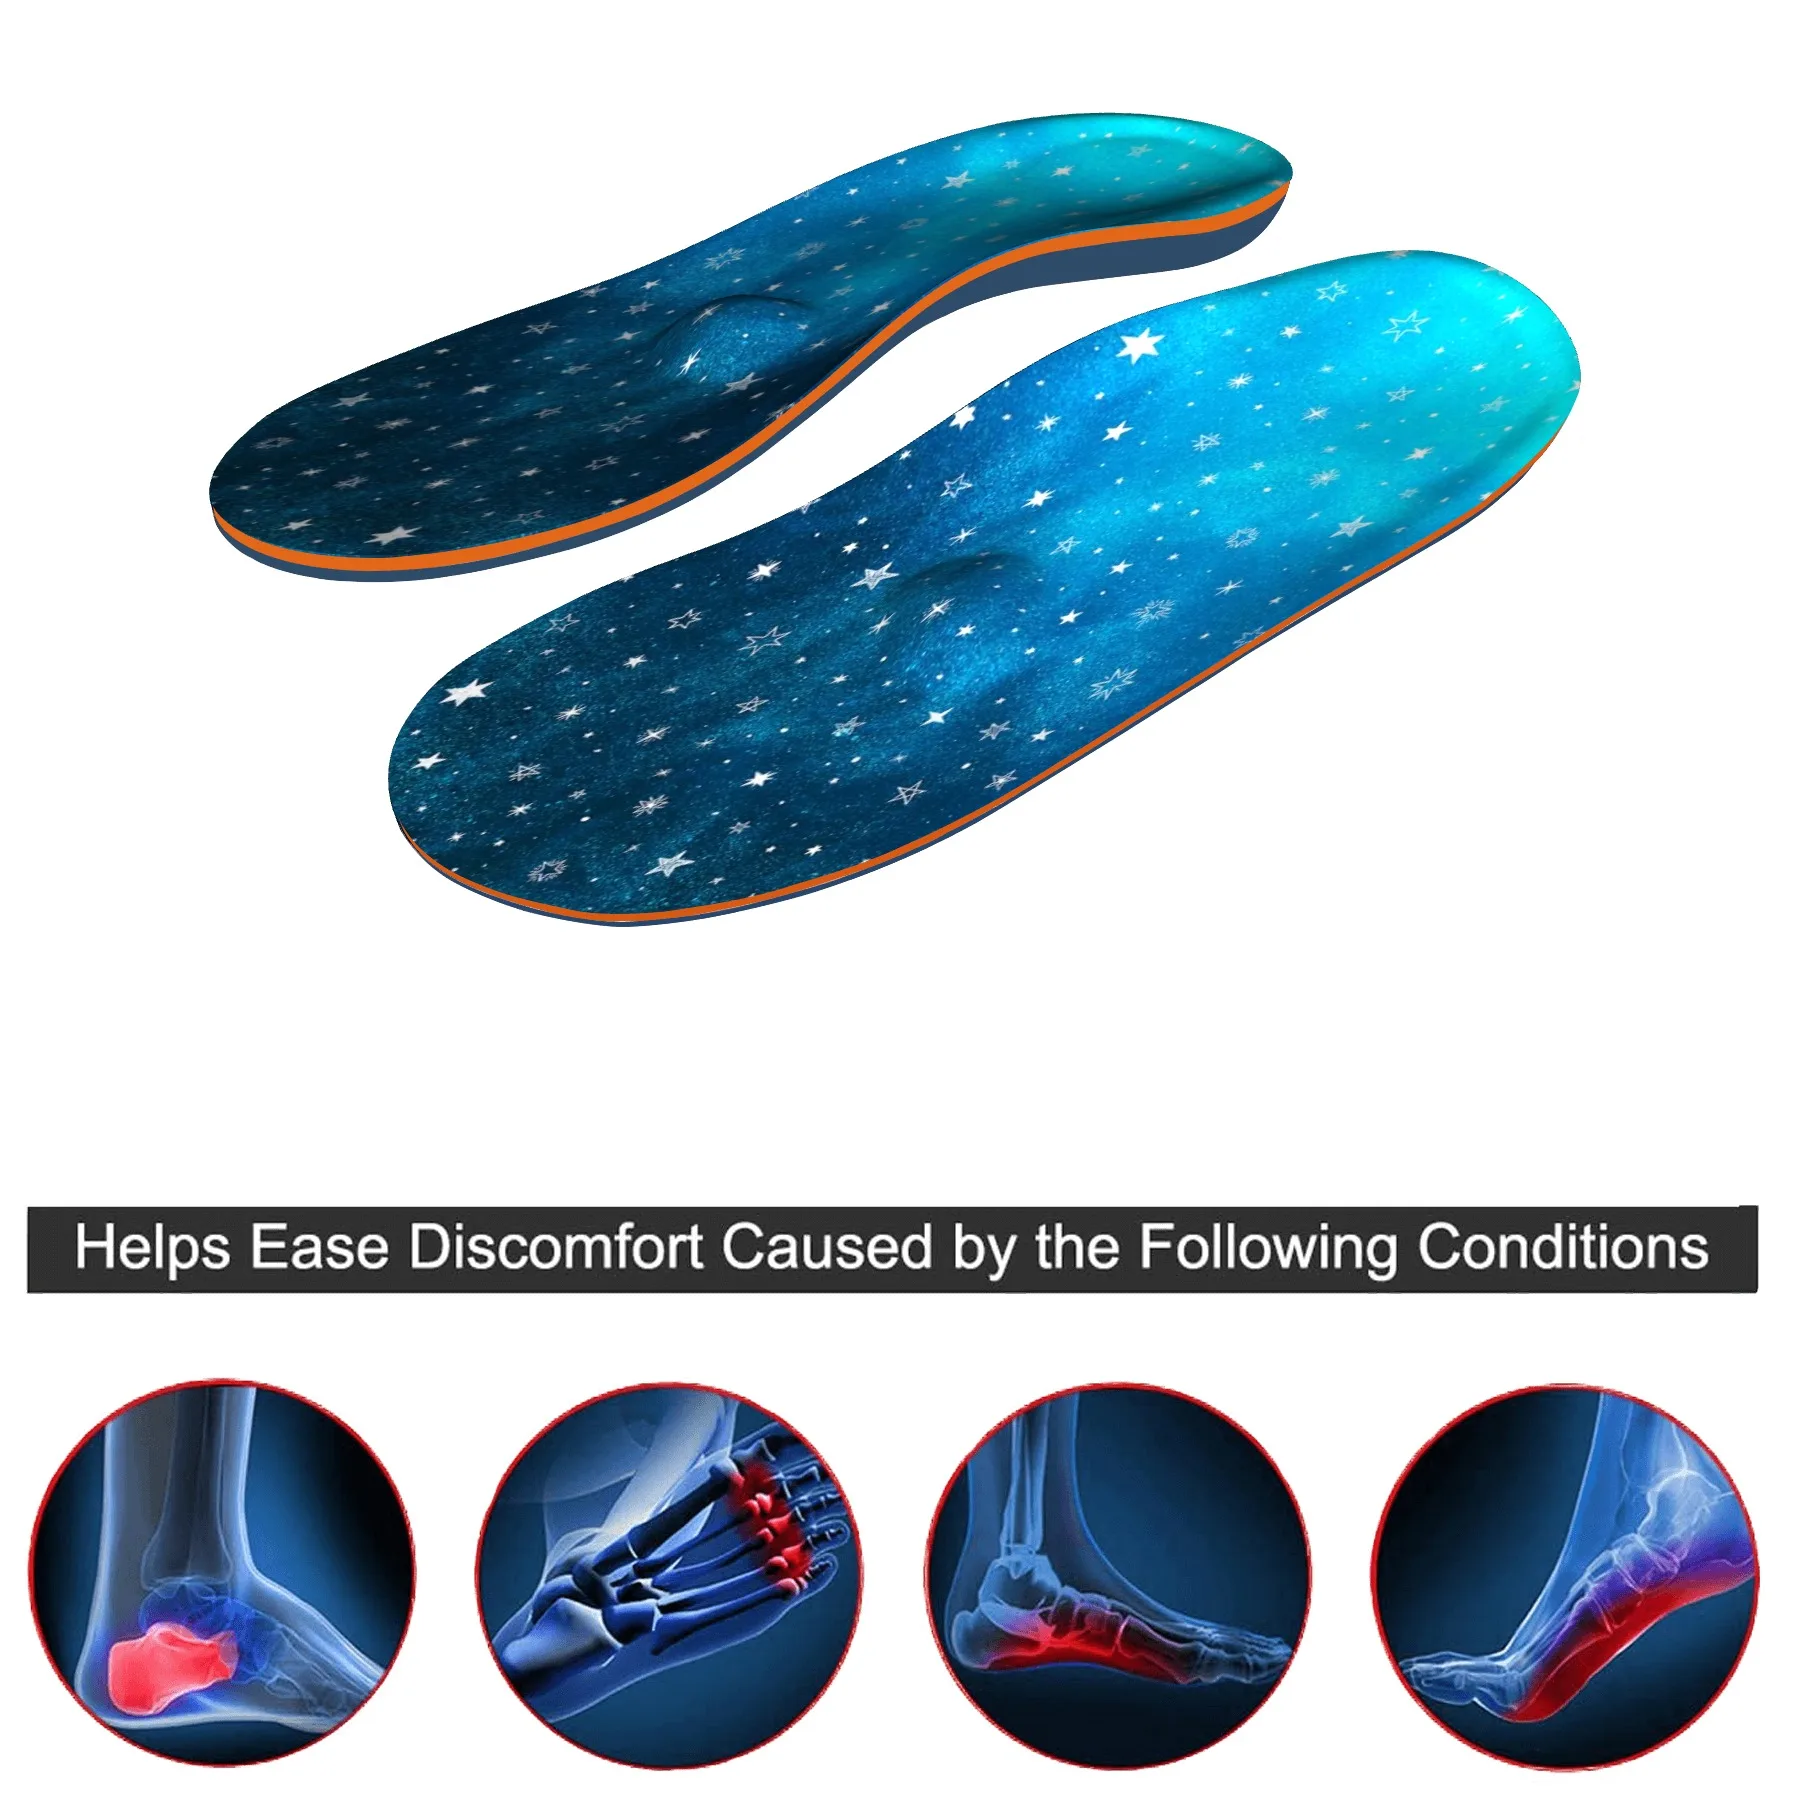 Flat Feet Orthopedic Plantar Fasciitis Insoles Heated Men Arch Support Template Heel Pain Women Sneakers Shoes Inserted Cushion